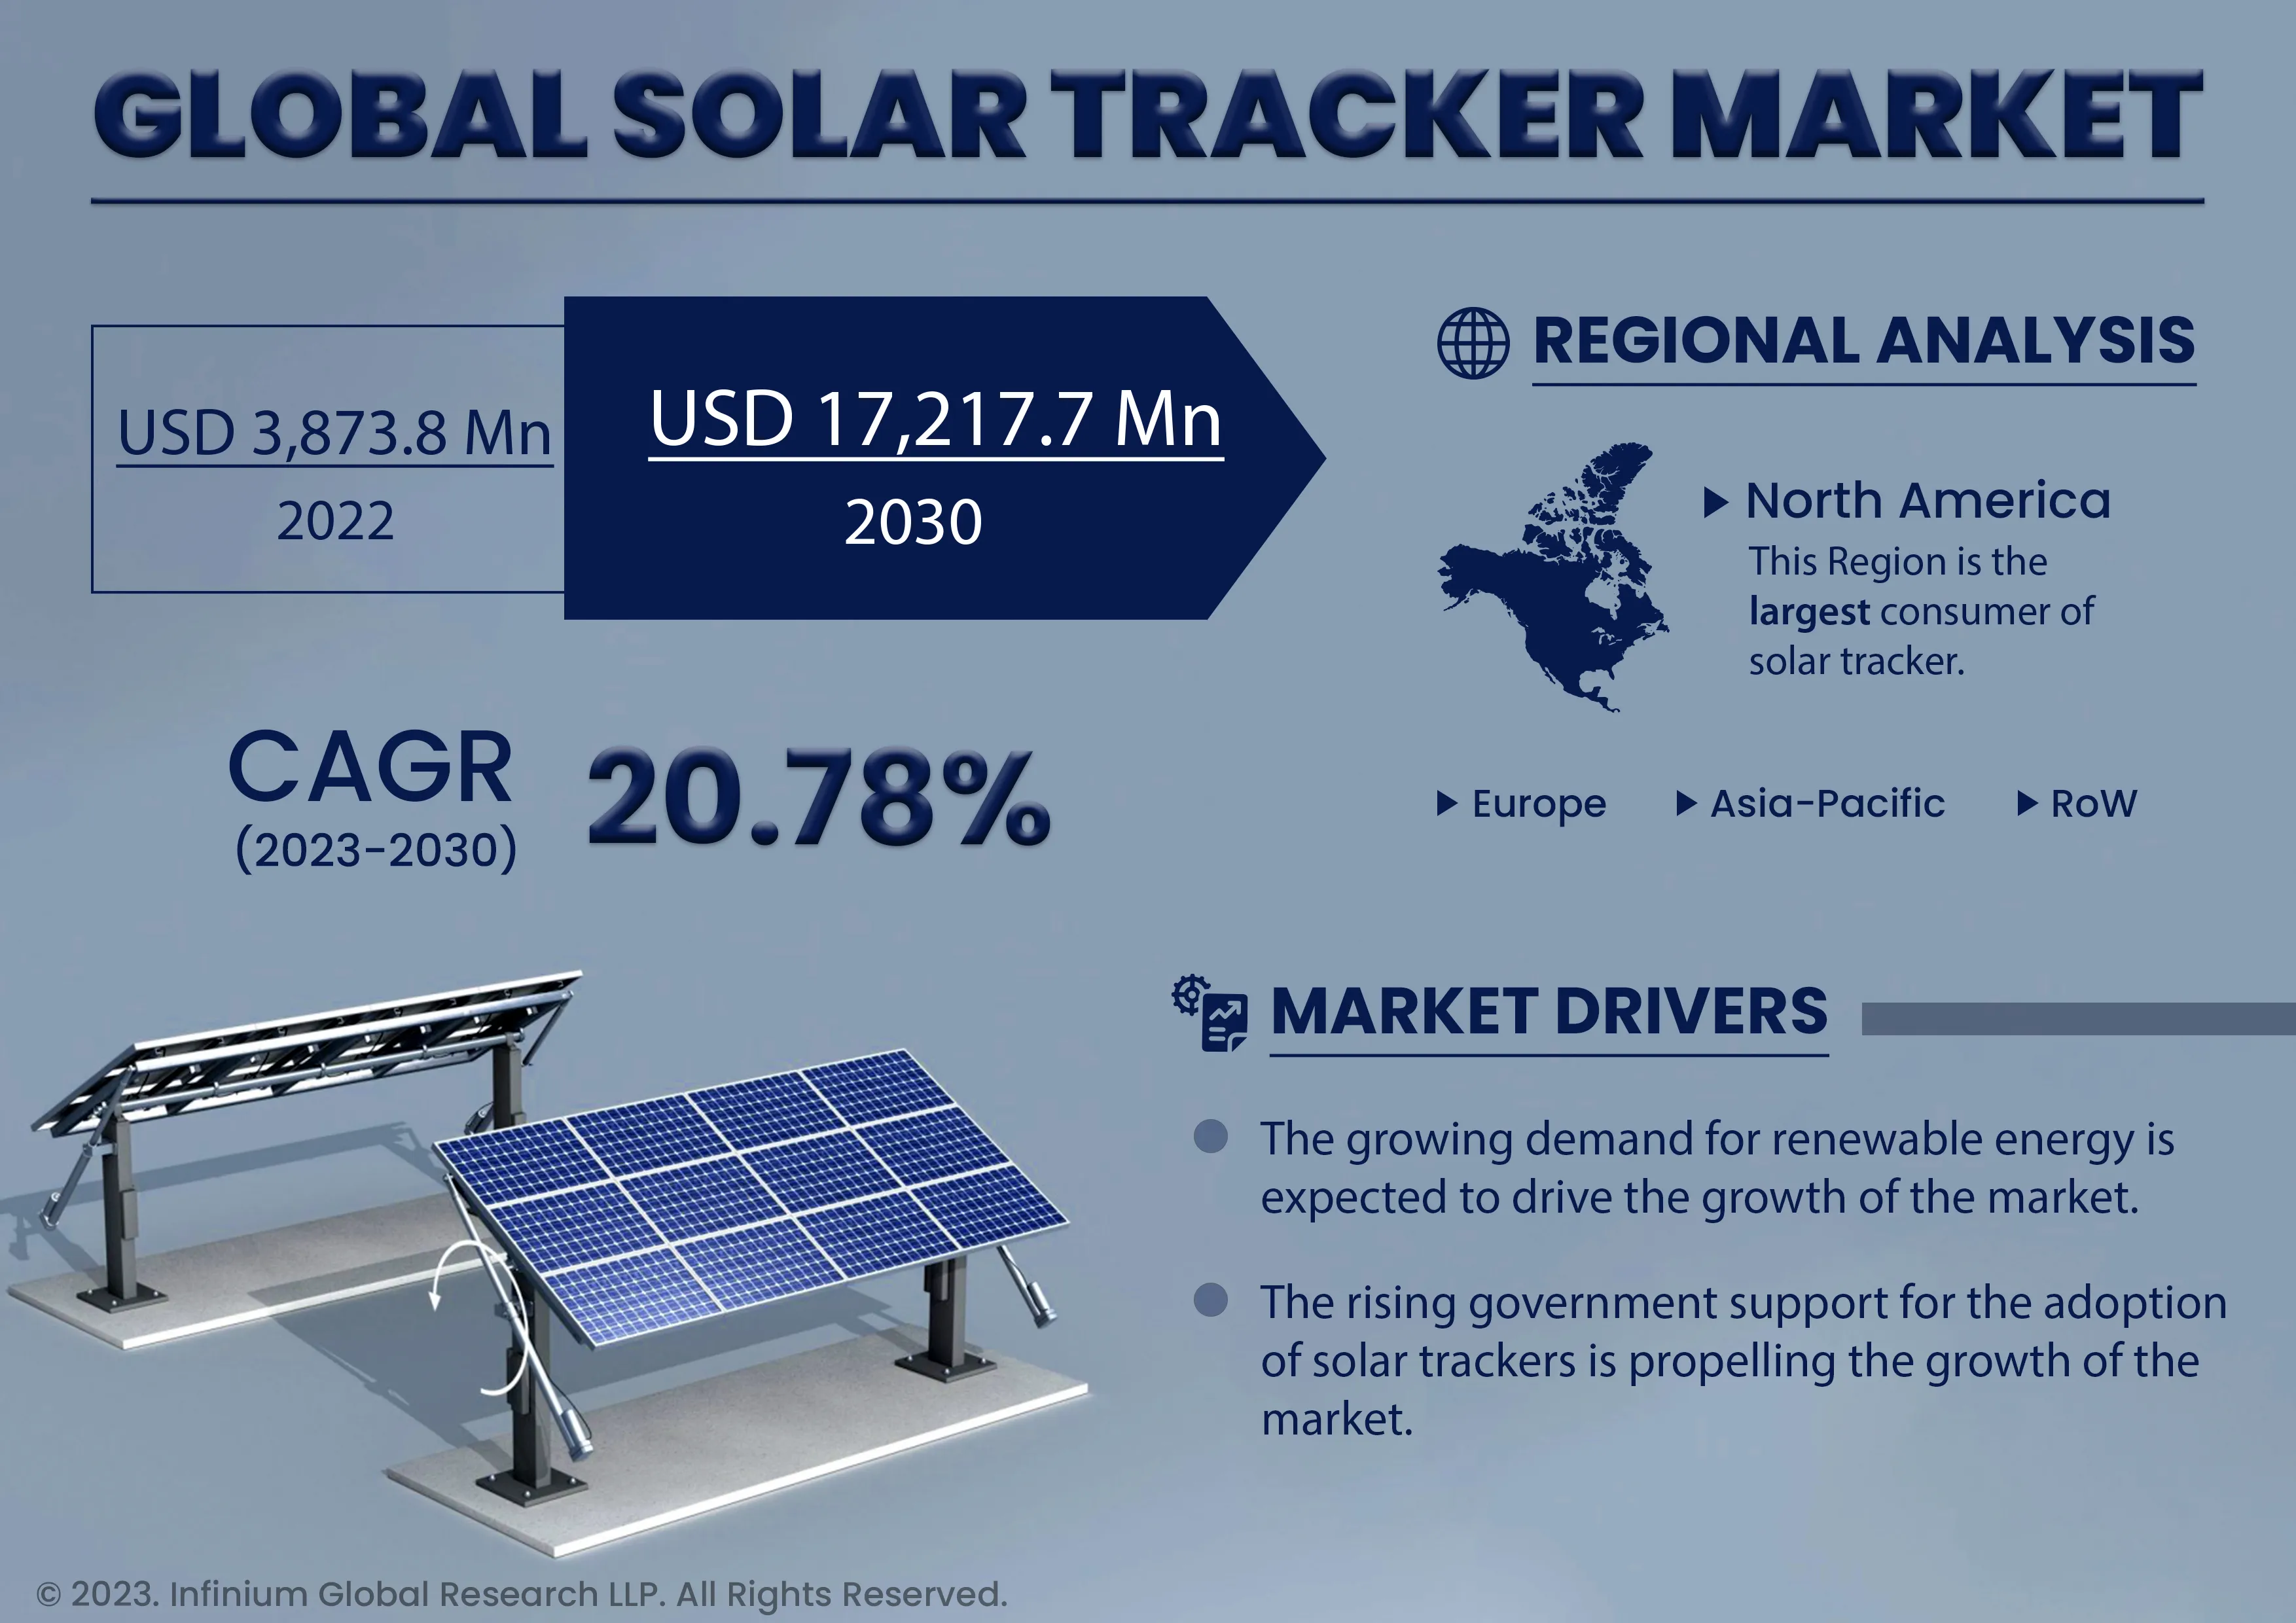 Infograph - The Value of the Market in 2022 was USD 3,873.8 Million and Expected to Reach USD 17,217.7 Million in 2030 with a CAGR of 20.78% During the Forecast Period.